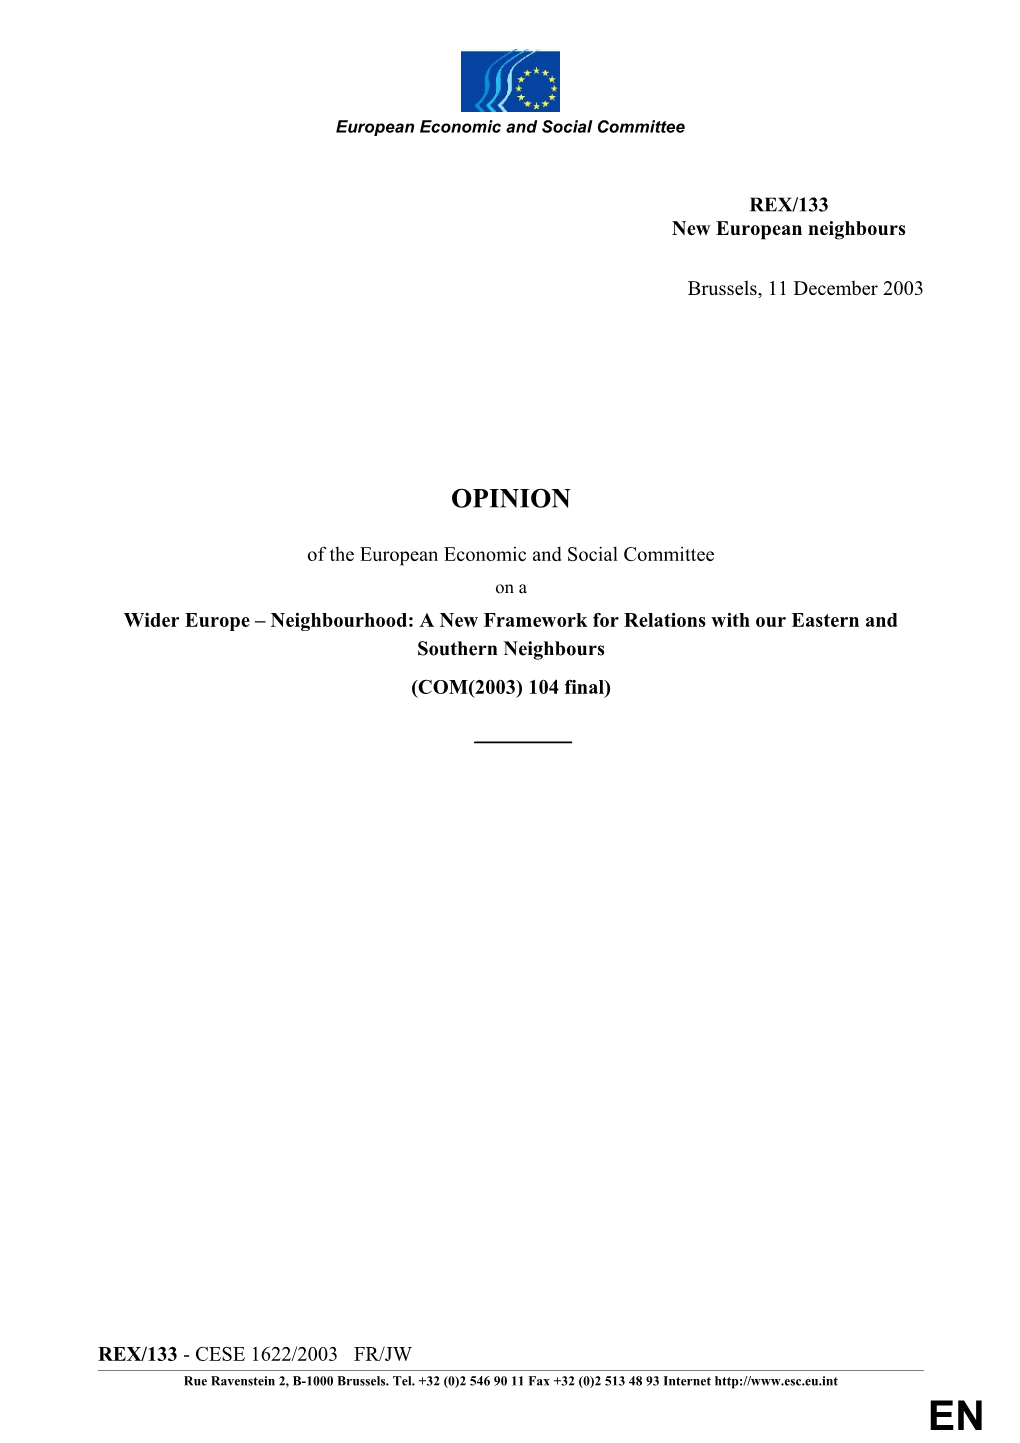 Committee Opinion CES1622-2003 AC EN